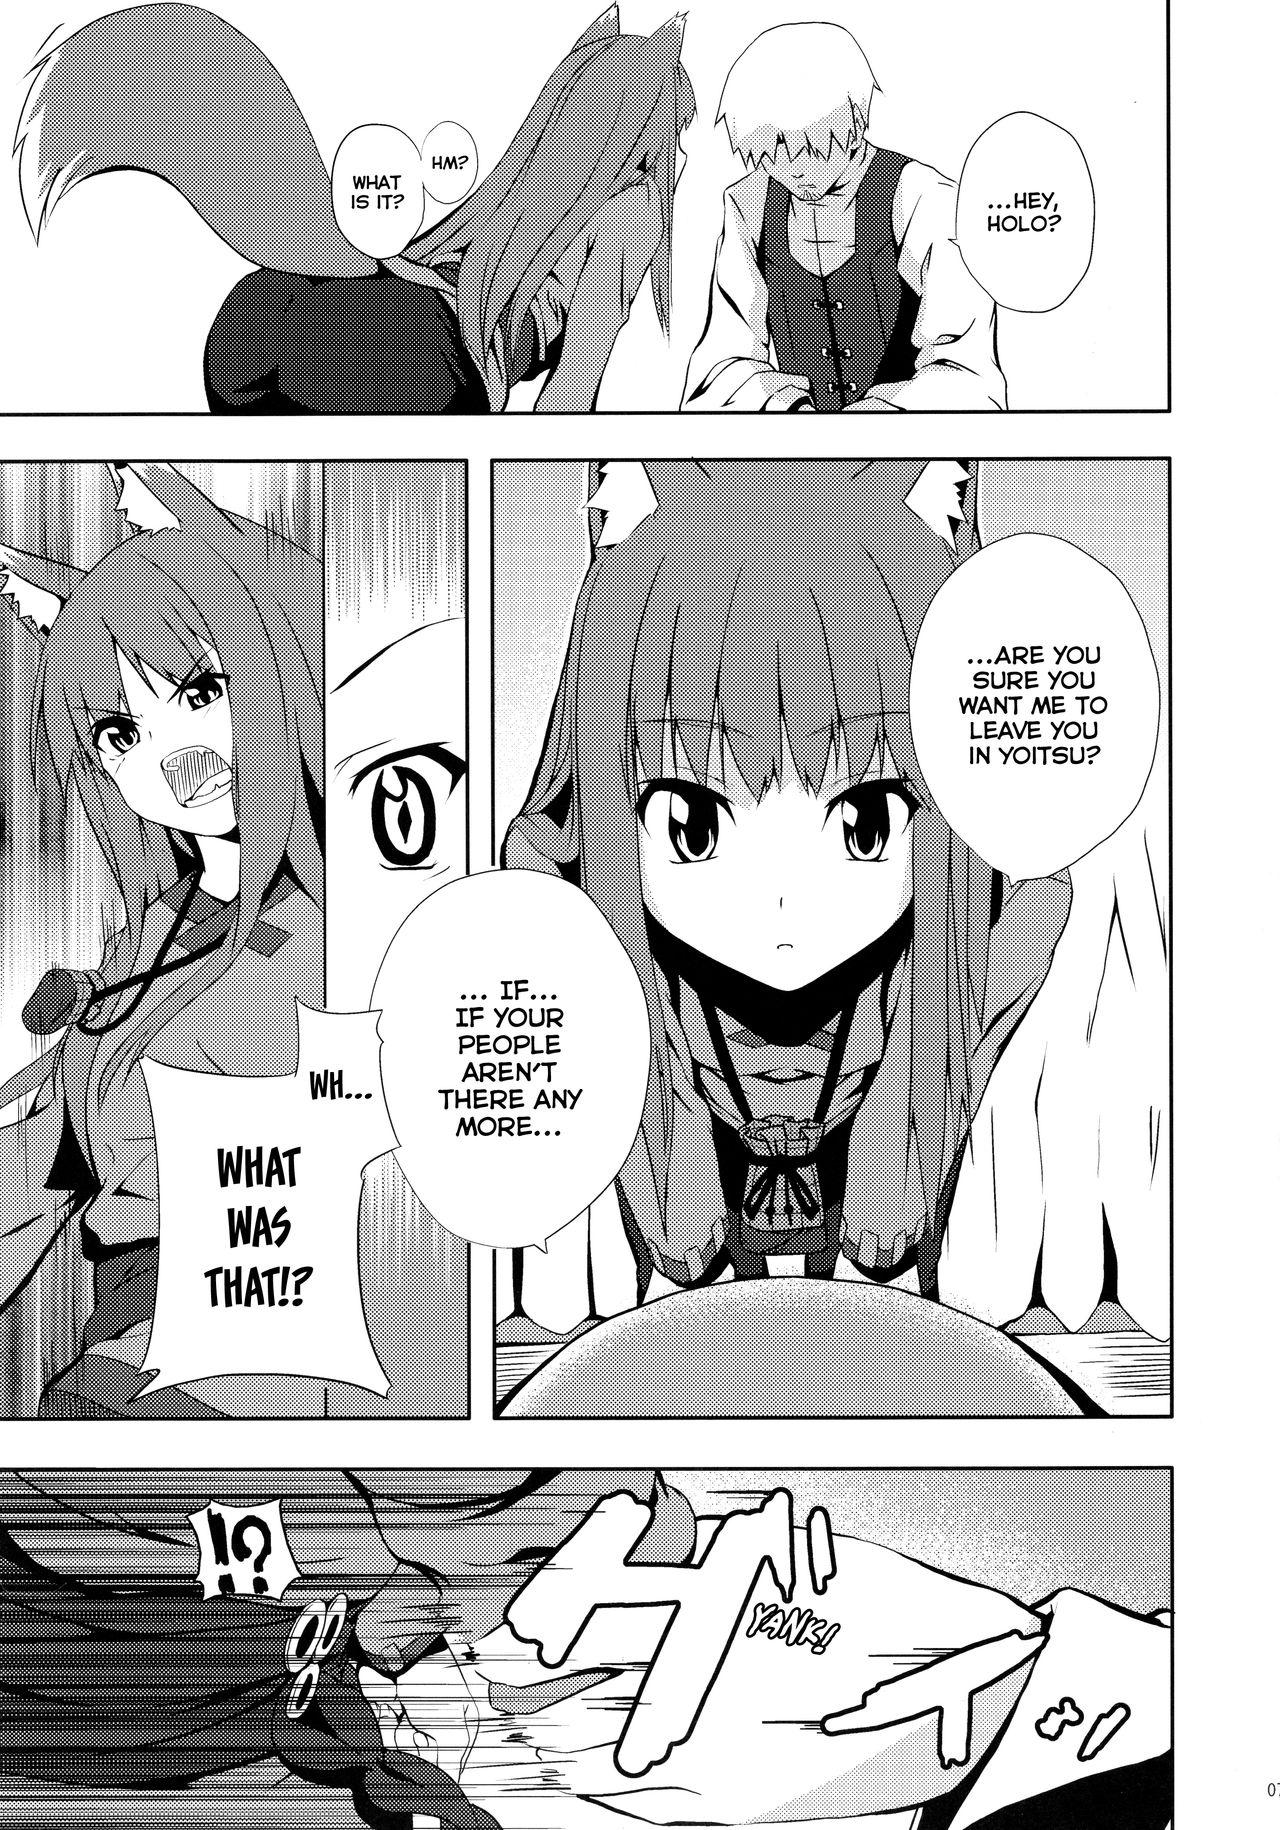 Family Taboo Bitter Apple - Spice and wolf Gay Group - Page 7